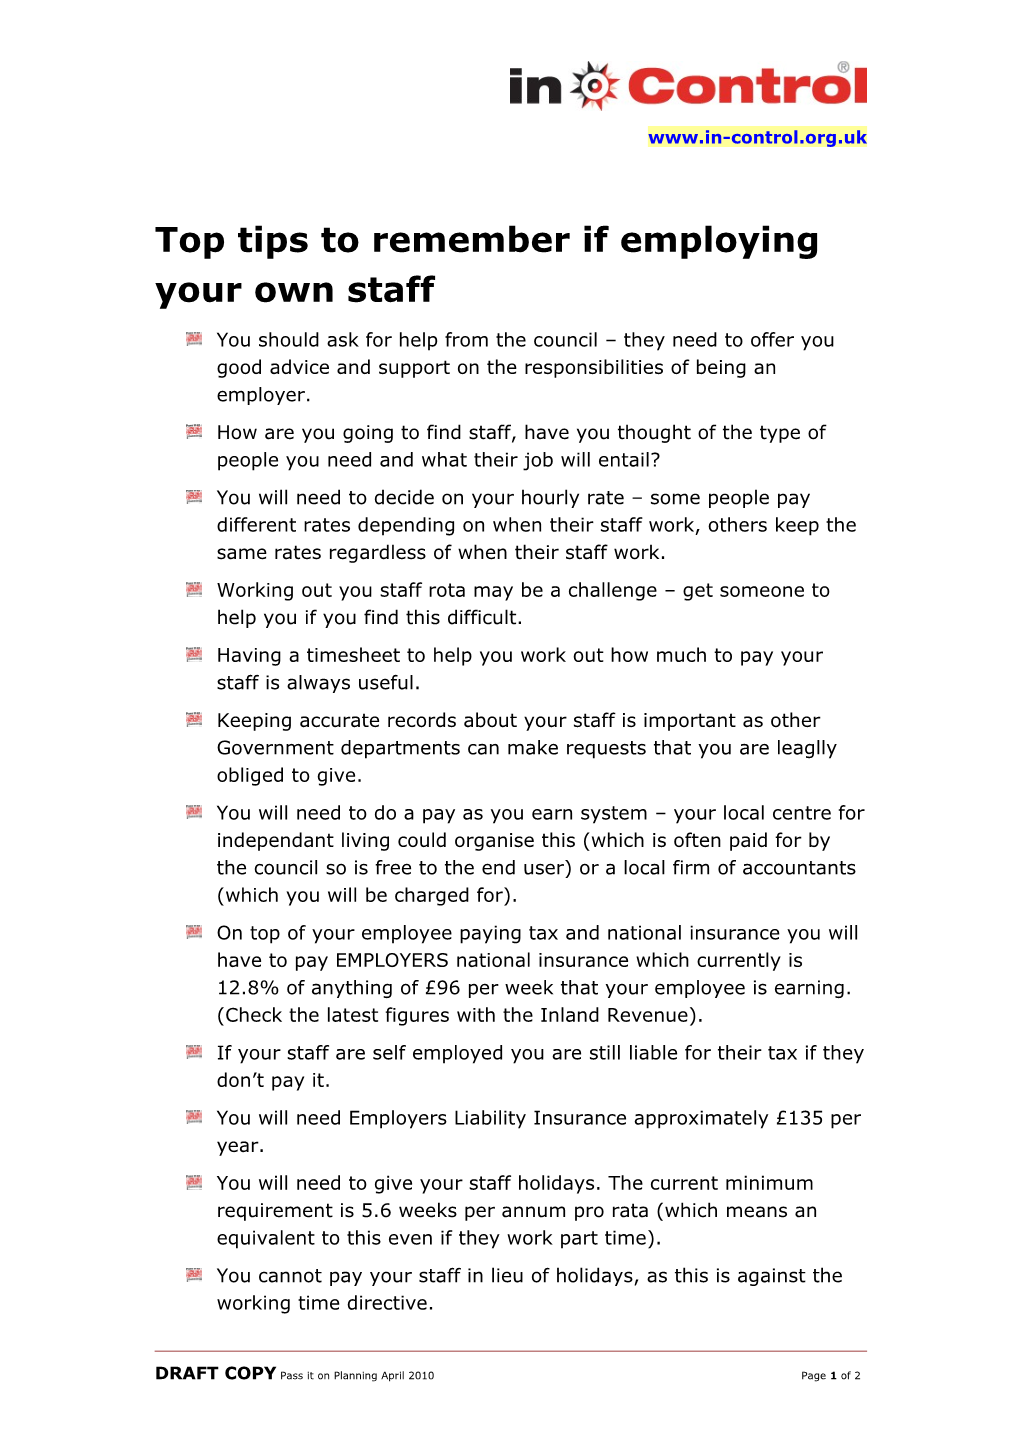 Top Tips to Remember If Employing Your Own Staff